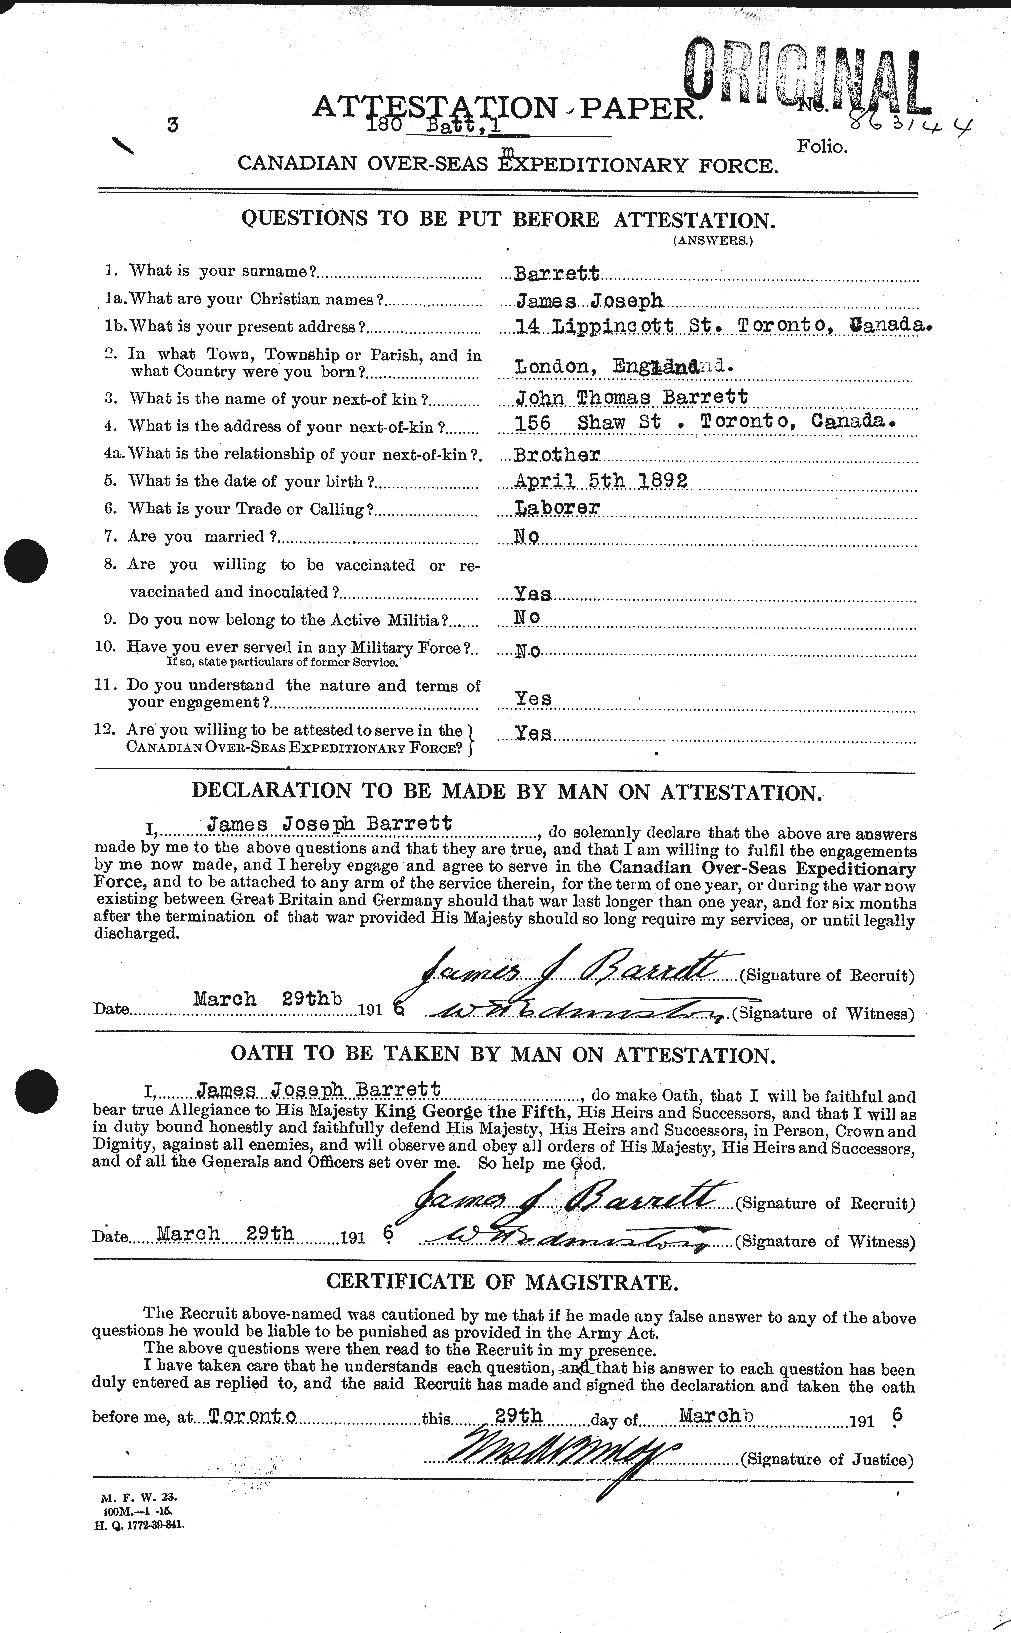 Personnel Records of the First World War - CEF 220259a